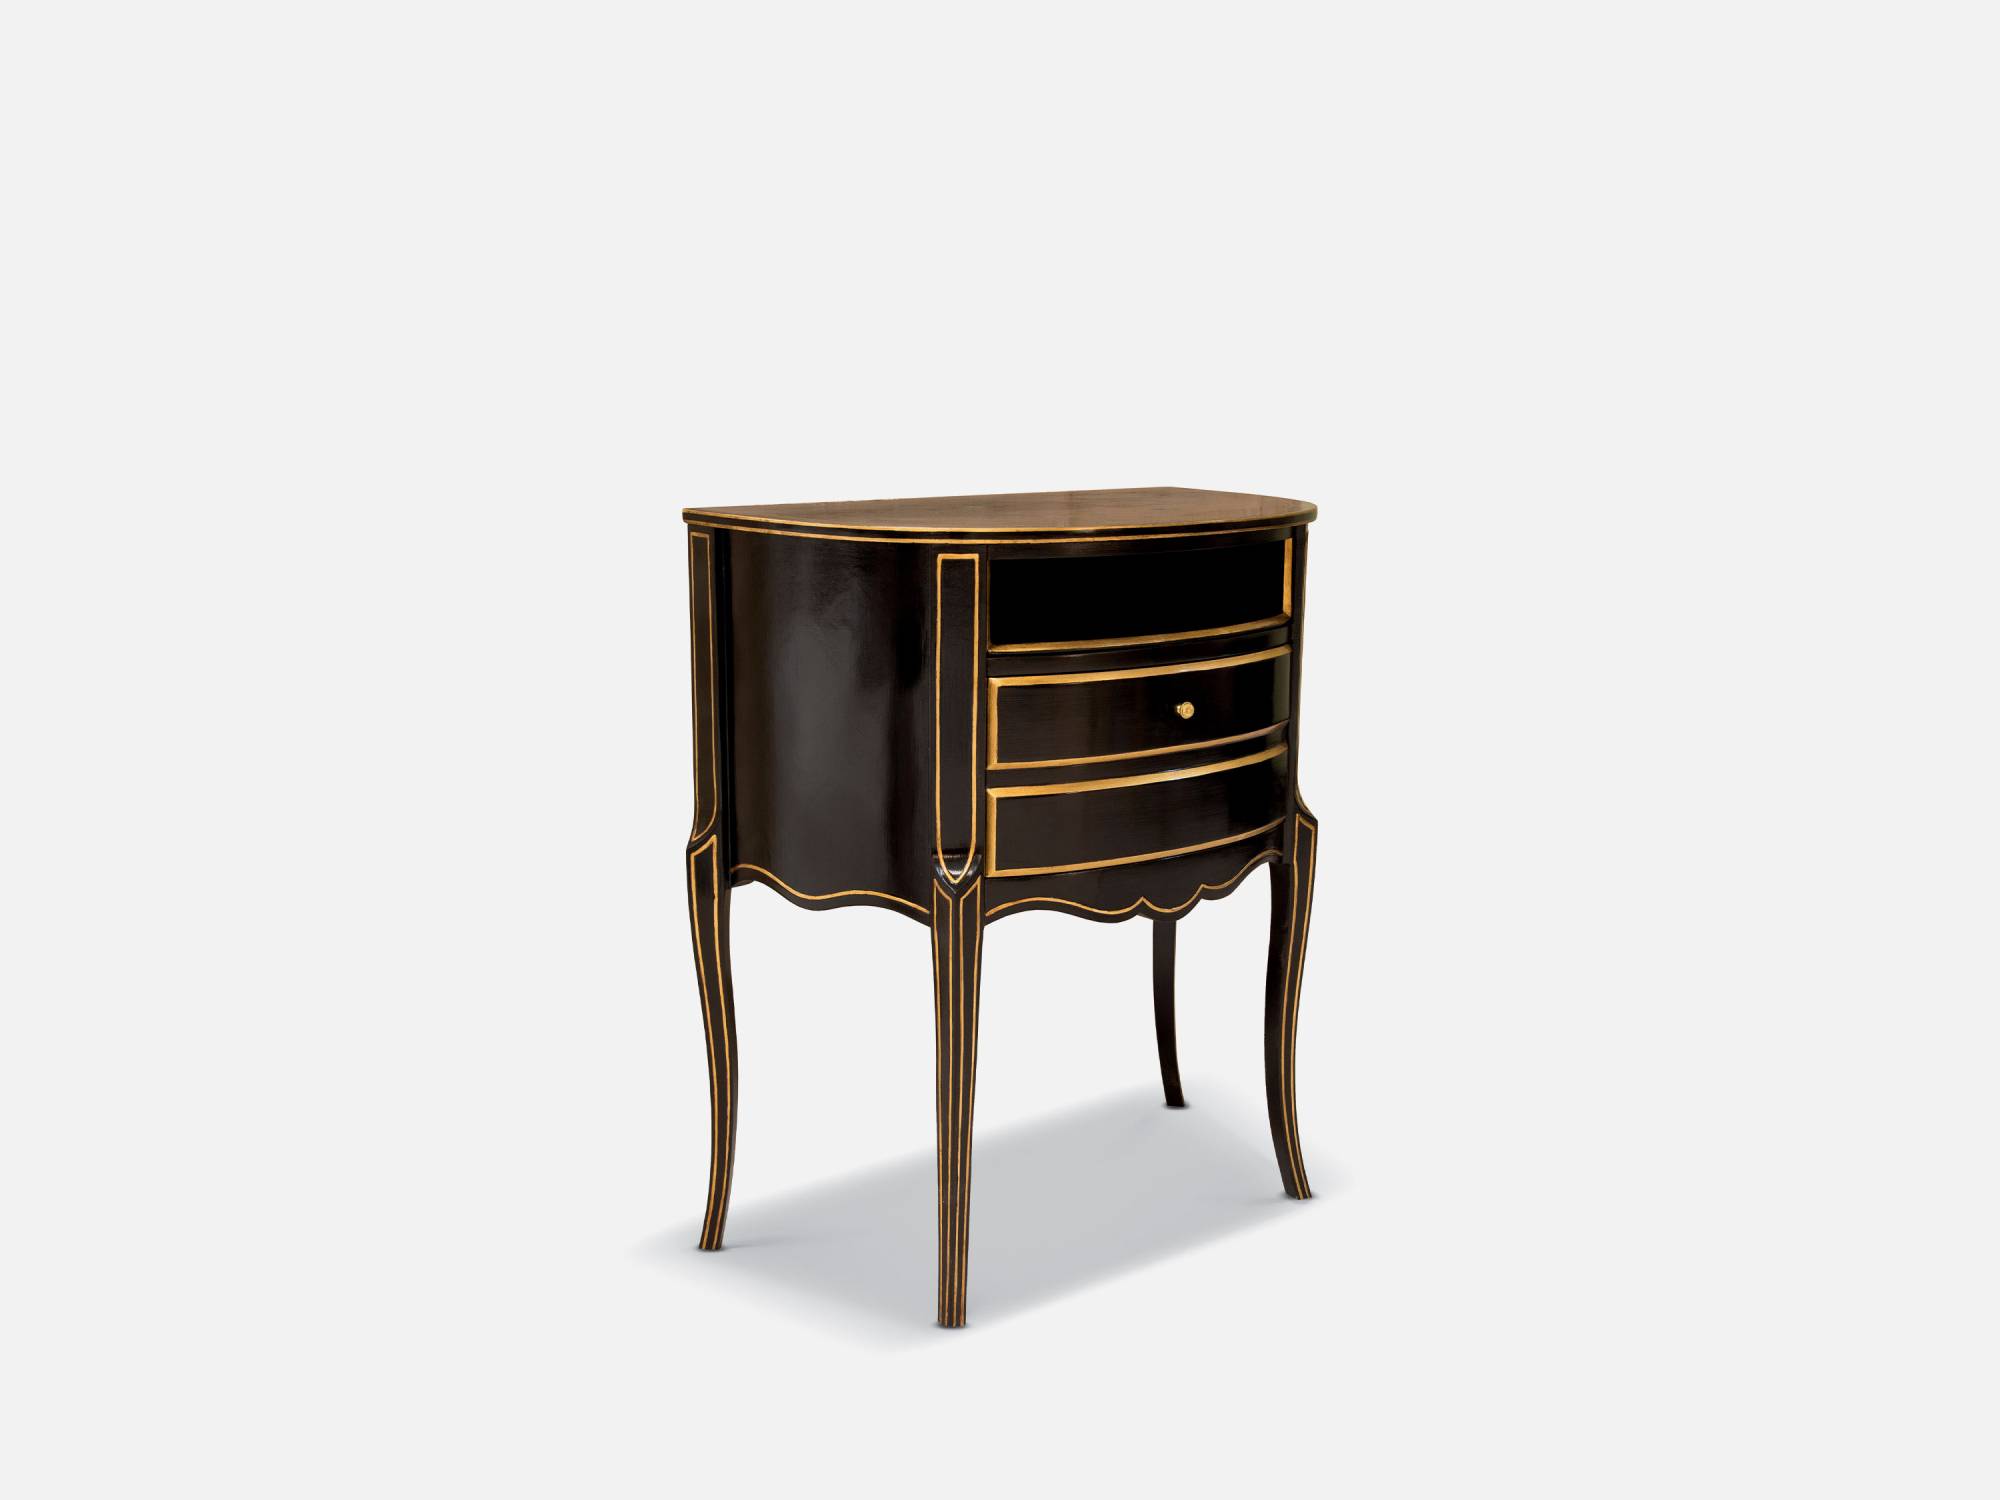 ART. 2223 – The elegance of luxury classic Bedside tables made in Italy by C.G. Capelletti.